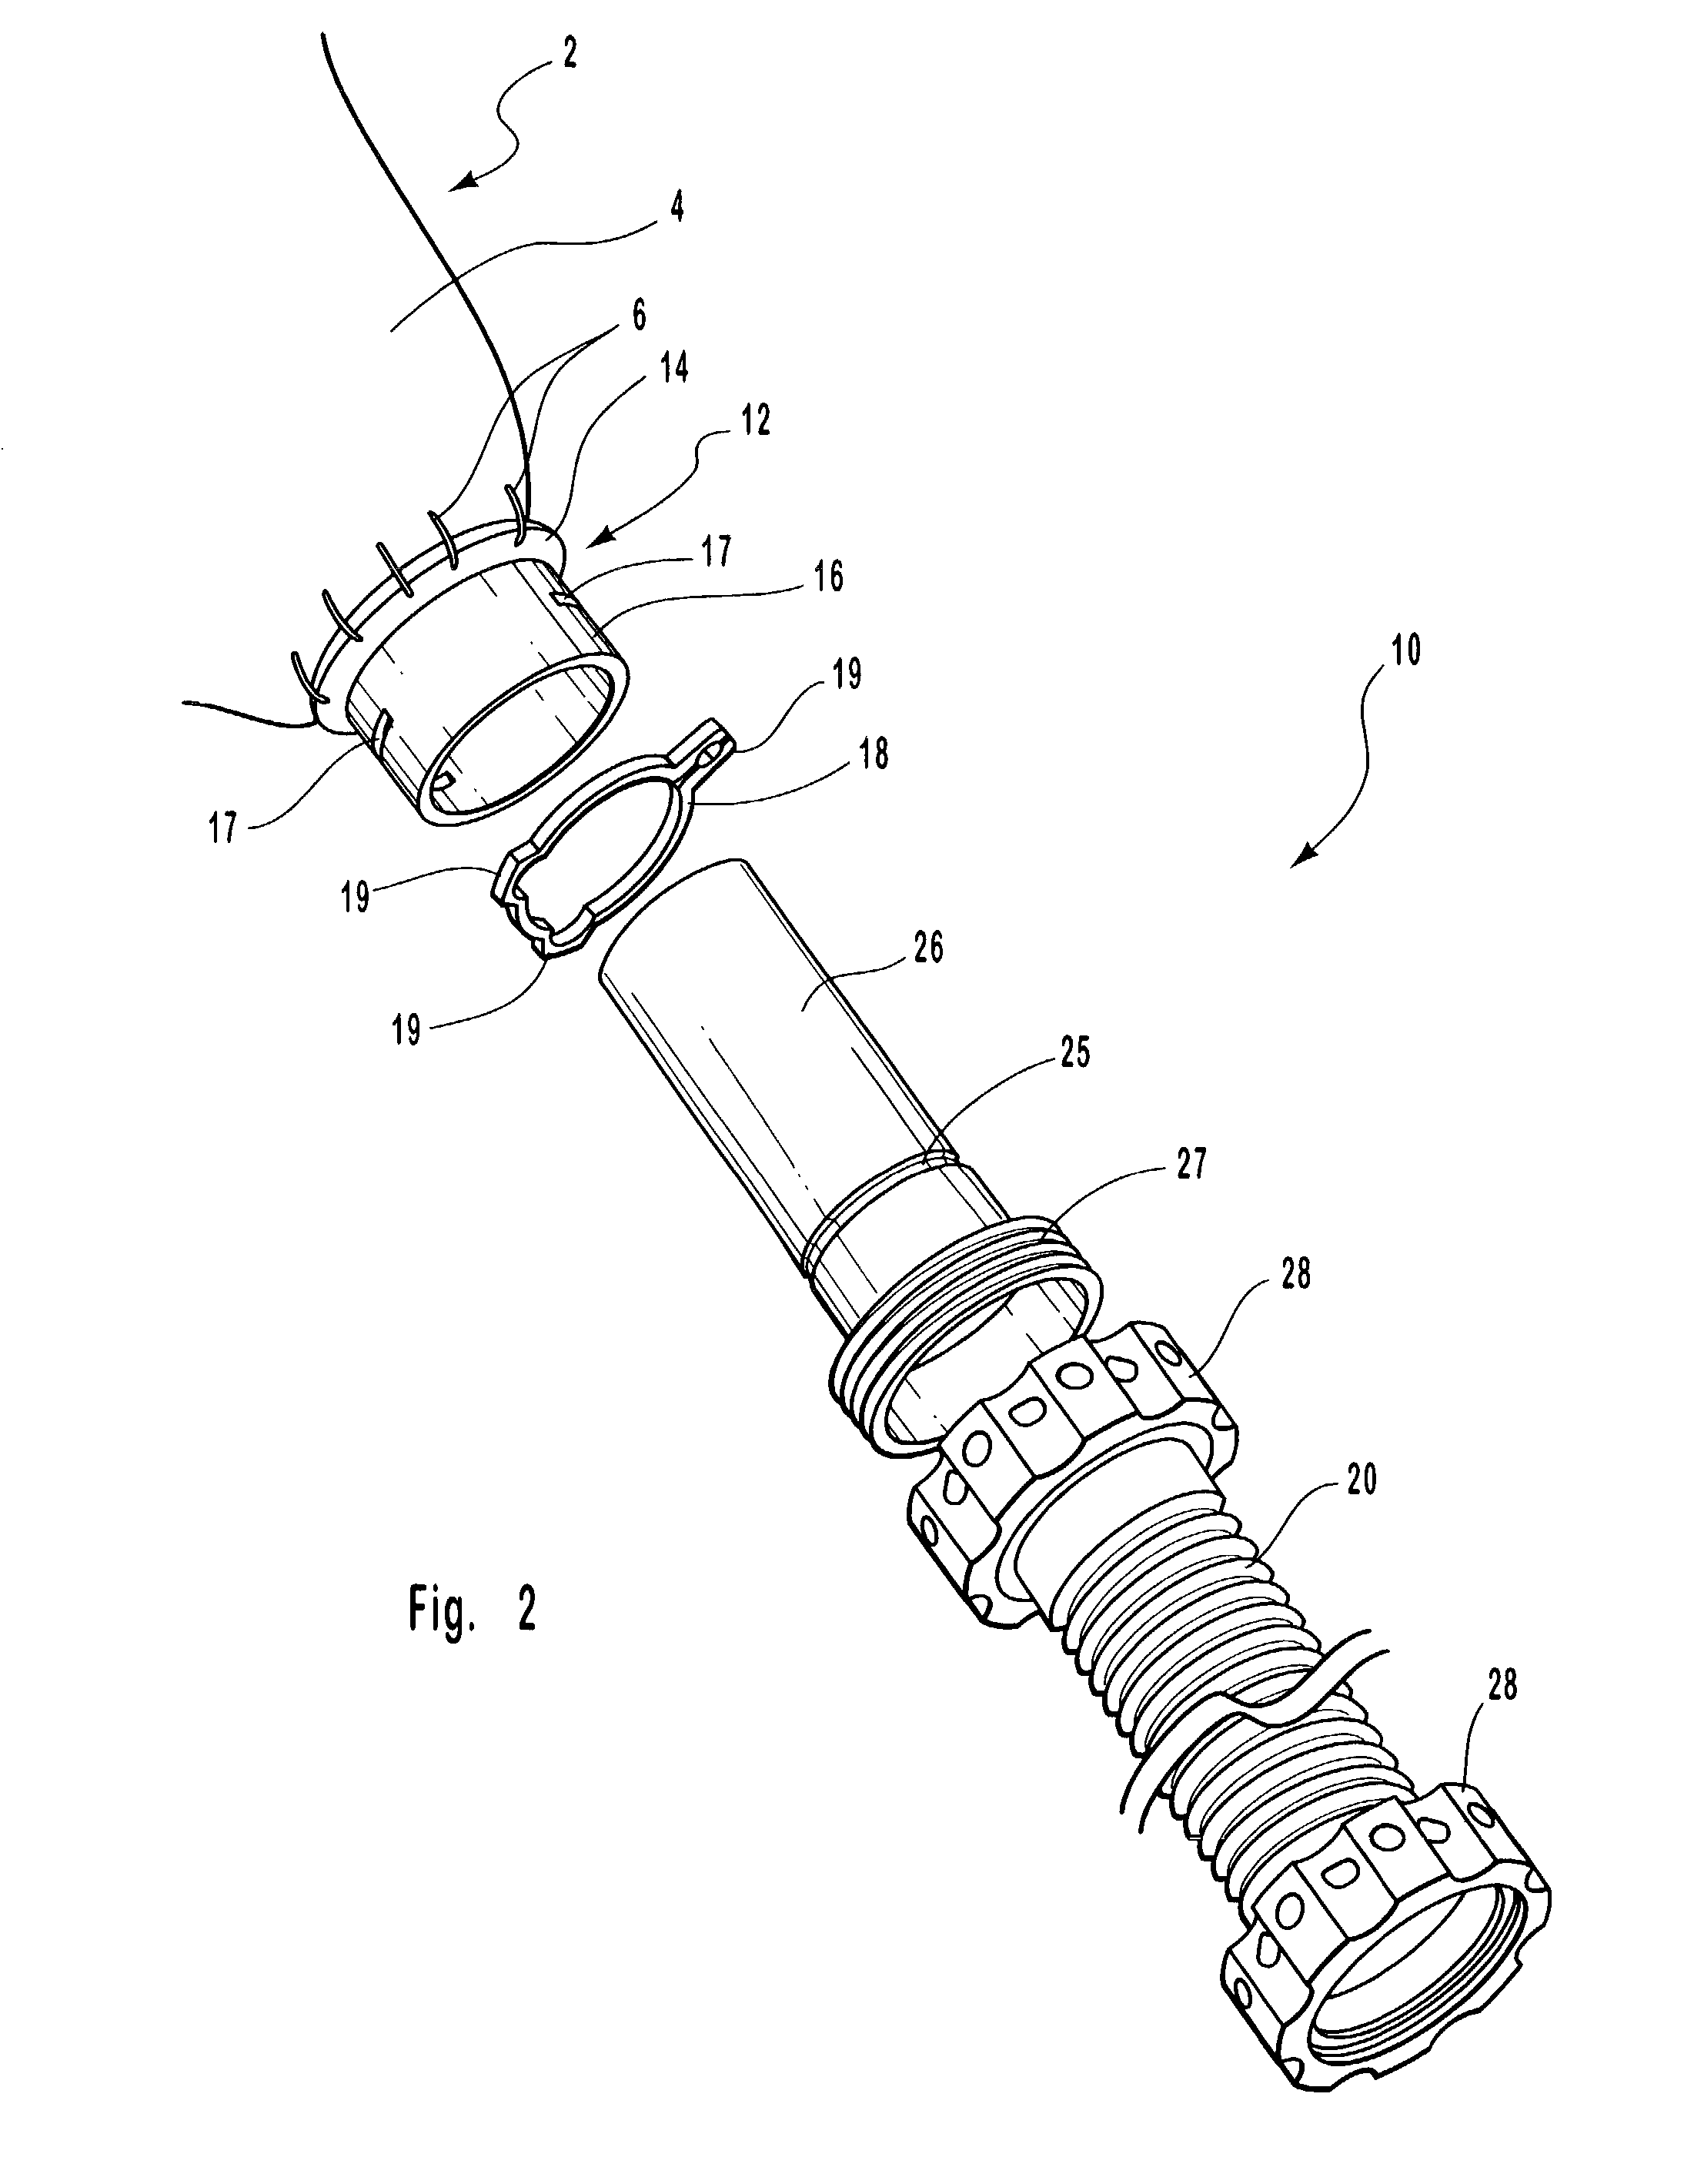 Cannulation apparatus and method